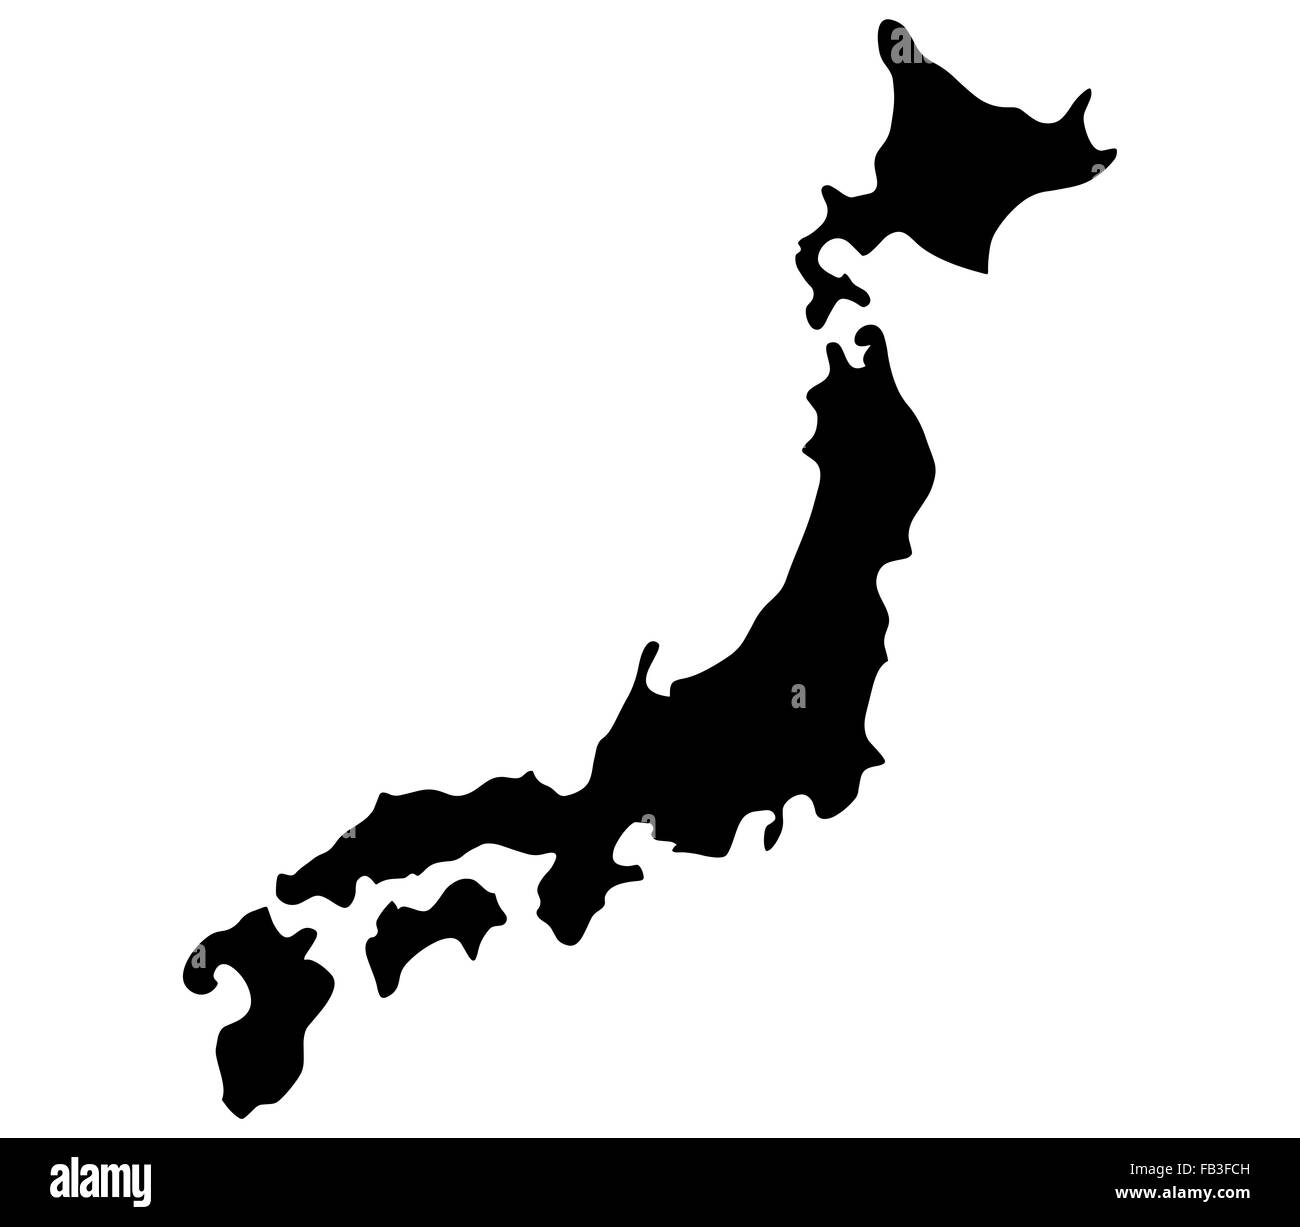 japan map on a white background Stock Photo